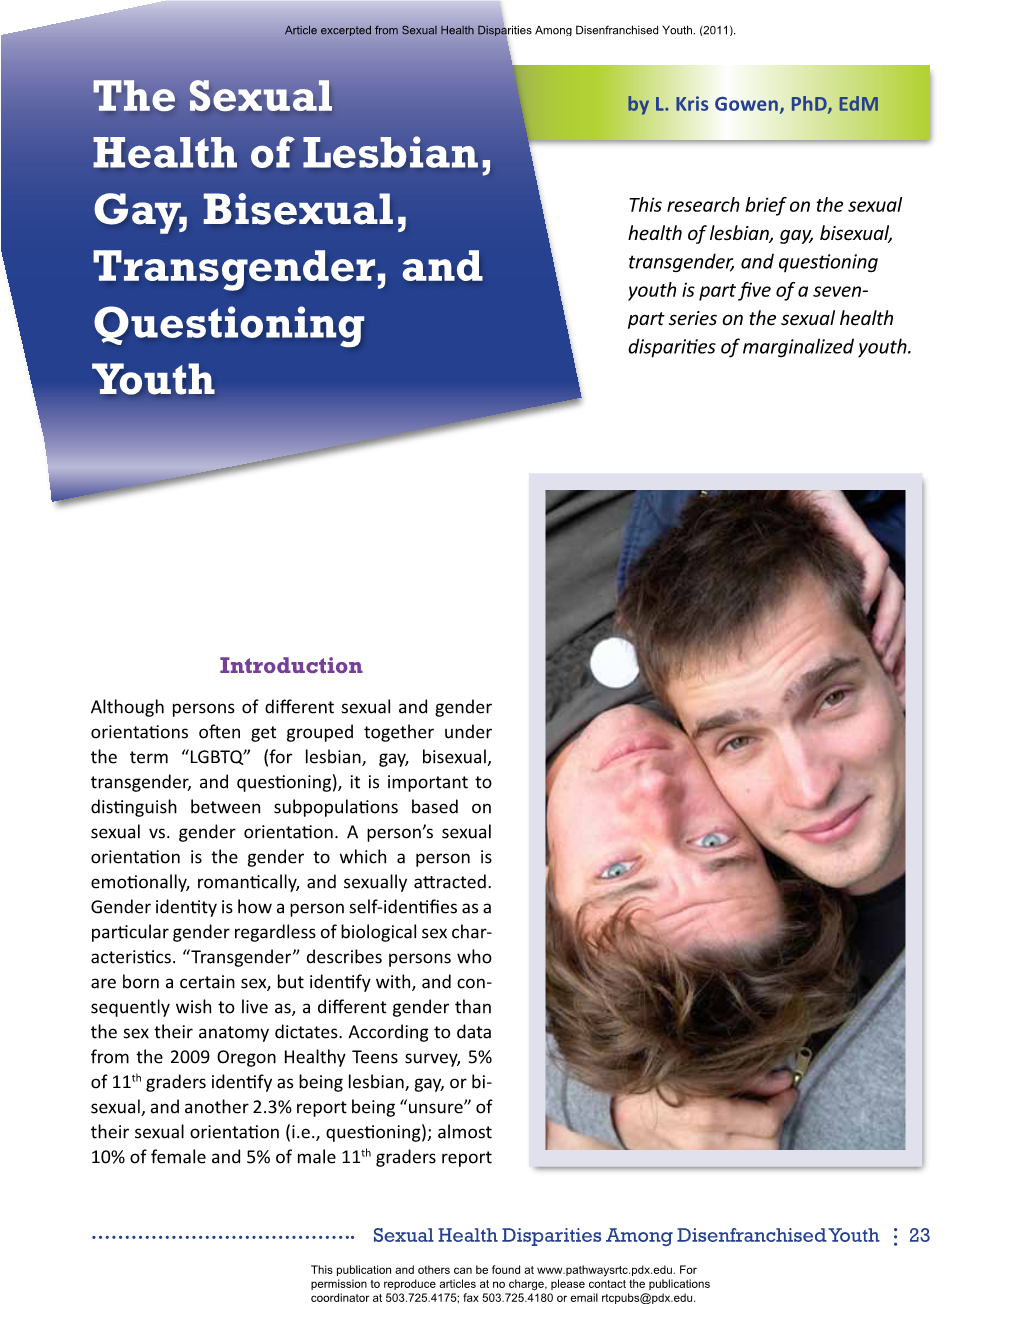 The Sexual Health of Lesbian, Gay, Bisexual, Transgender, And